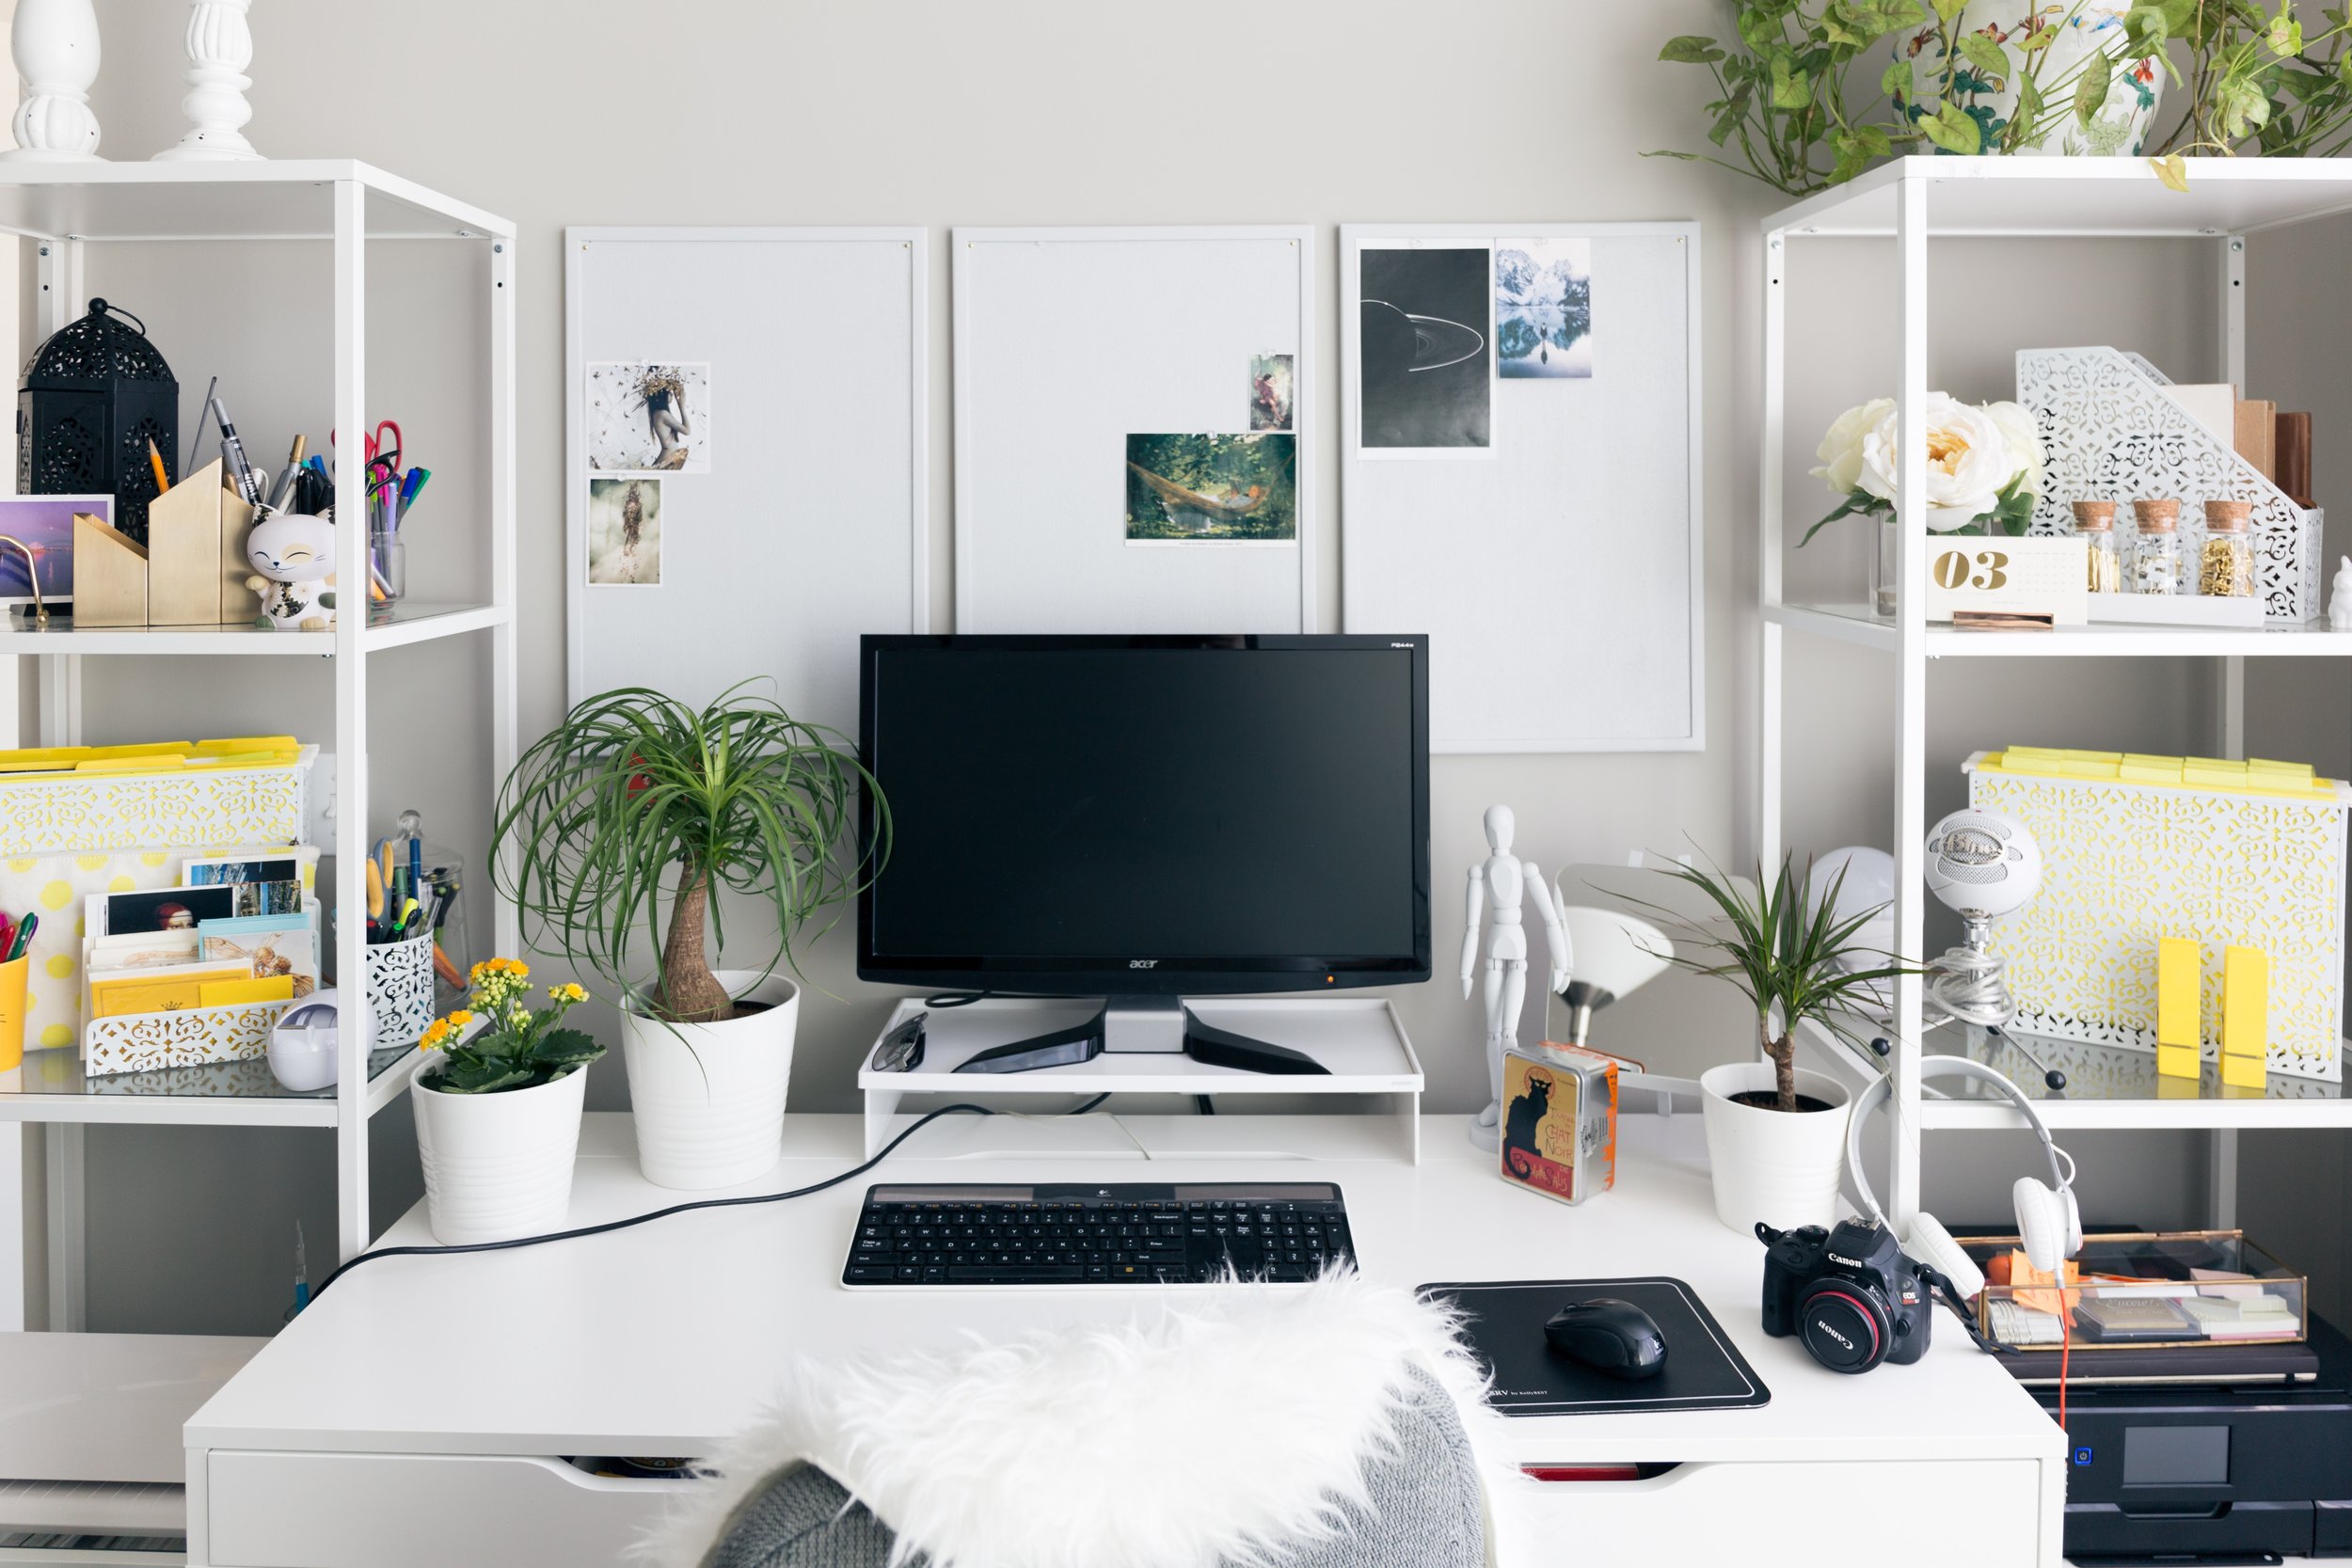 Home office setup: how to arrange a working from home space